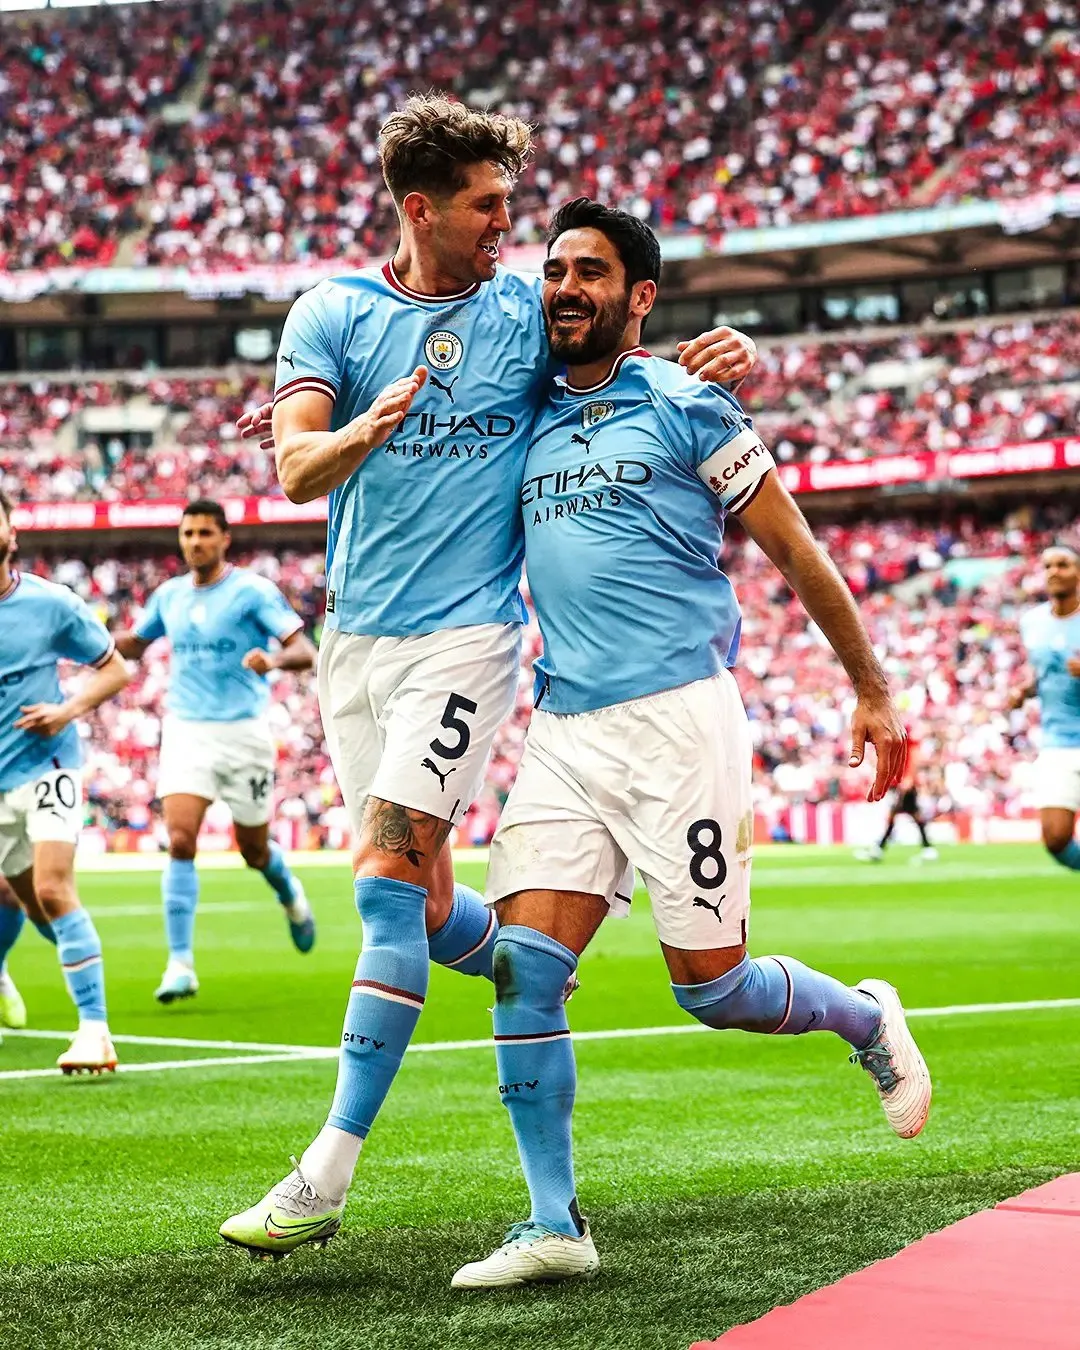 İlkay Gündoğan gave the lead to Manchester City for the second time in the match | Sportz Point